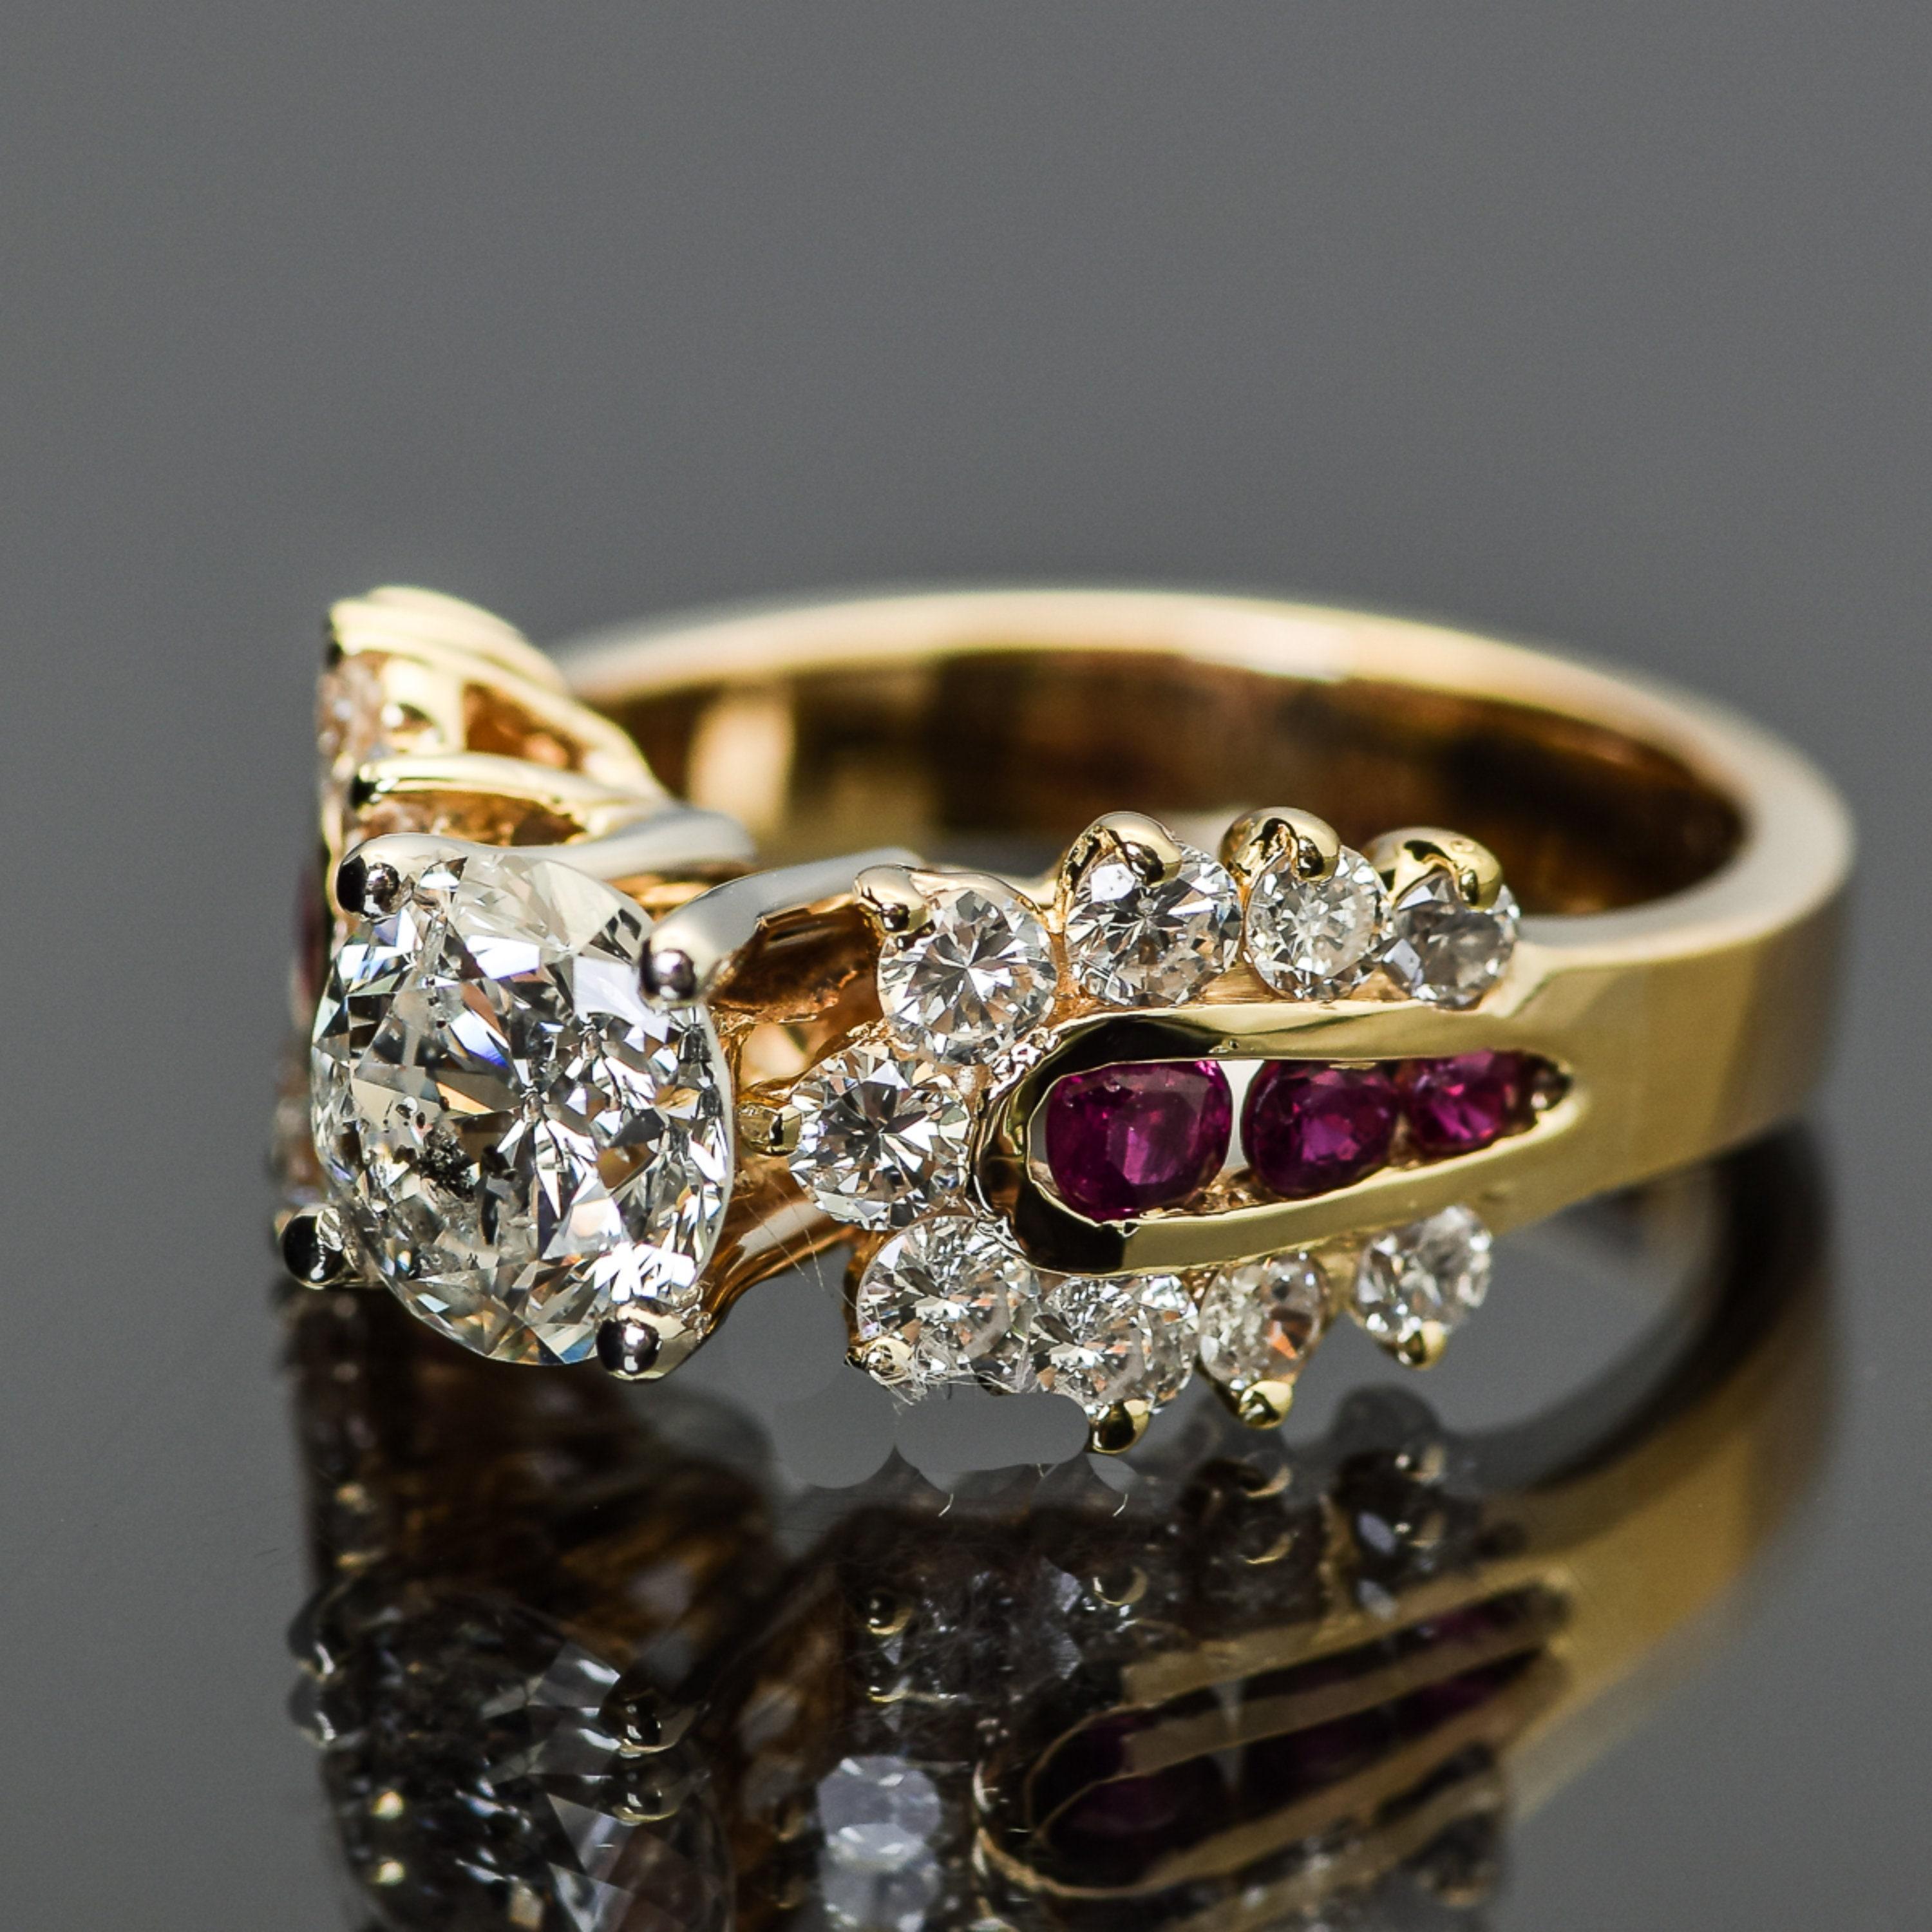 For Sale:  Certified 2.43 Carat Diamond Ruby Art Deco Style Engagement Ring in 18K Gold 6